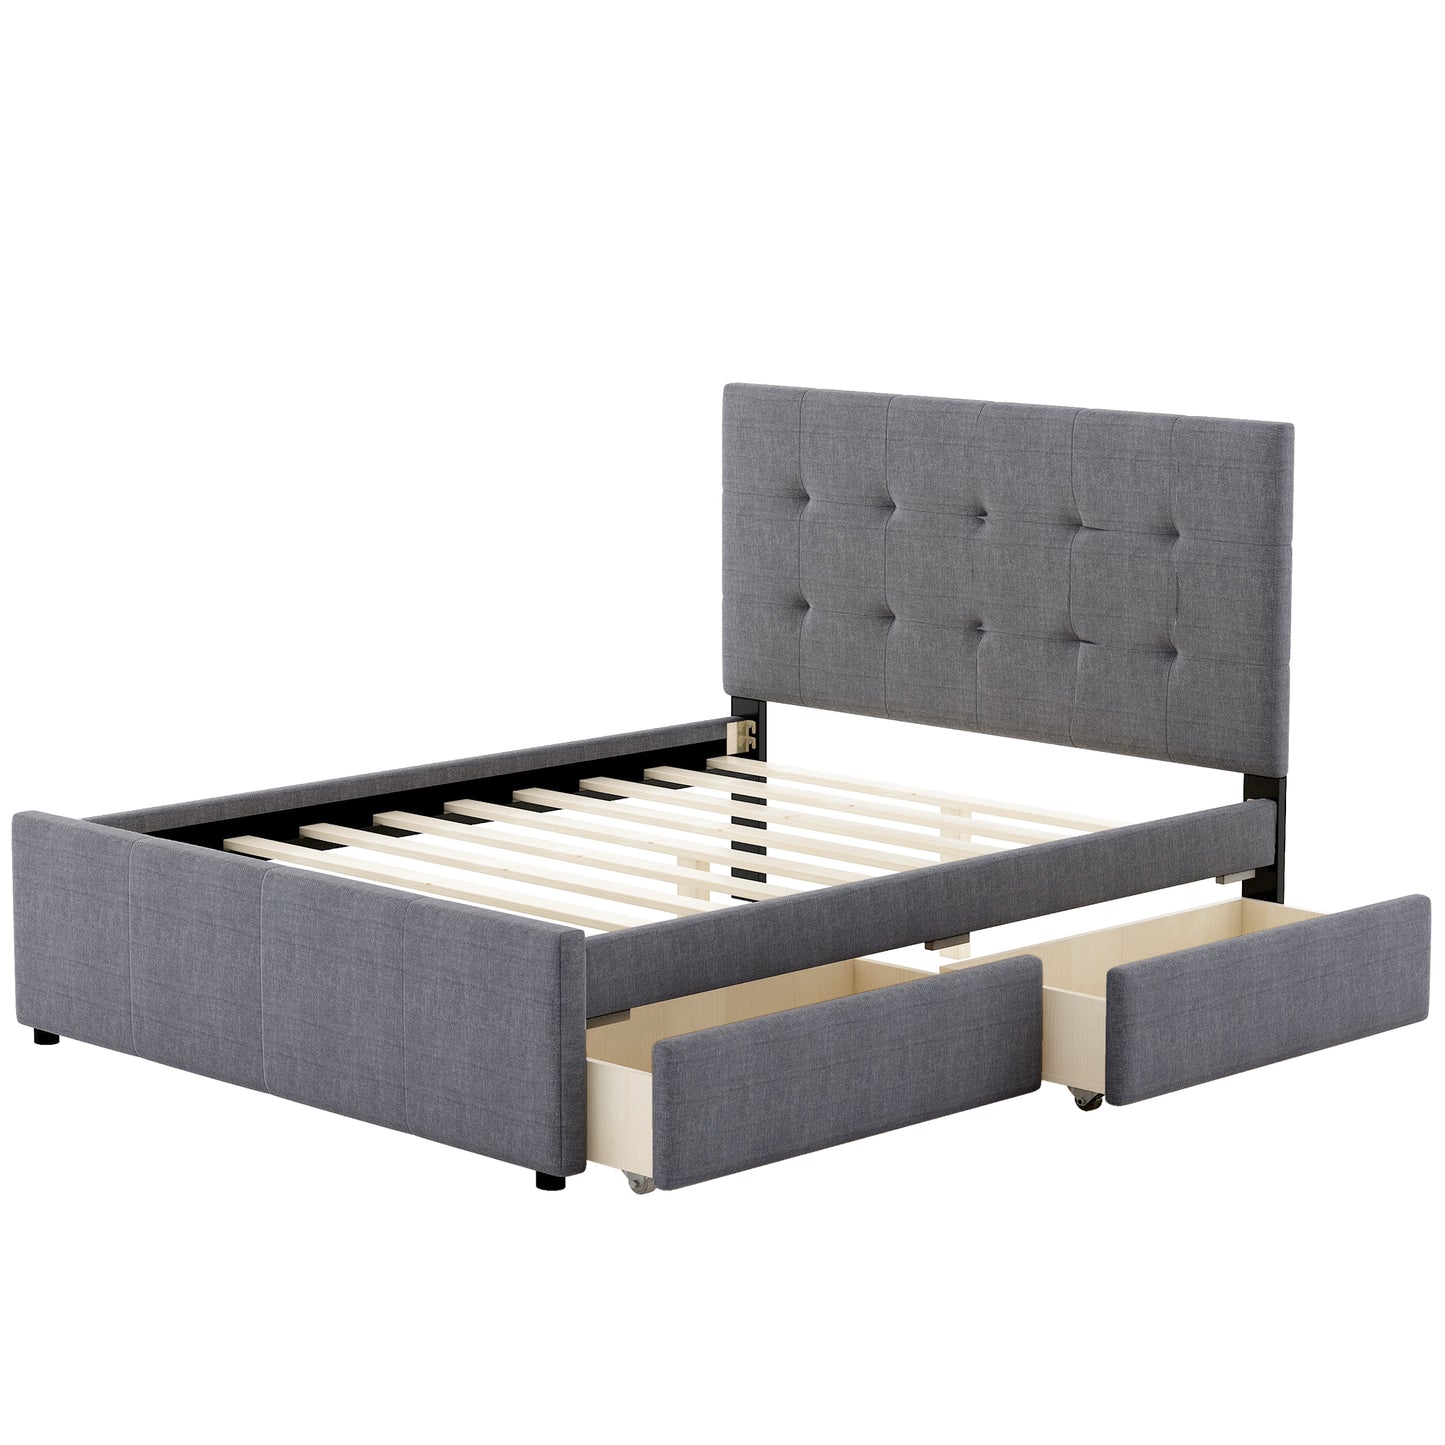 SYNGAR Upholstered Platform Bed Frame with Headboard and Footboard, Queen Size Bed Frames with Storage, No Box Spring Needed, Bedroom Furniture Storage Bed Frame for Kids Teens Adults, Gray